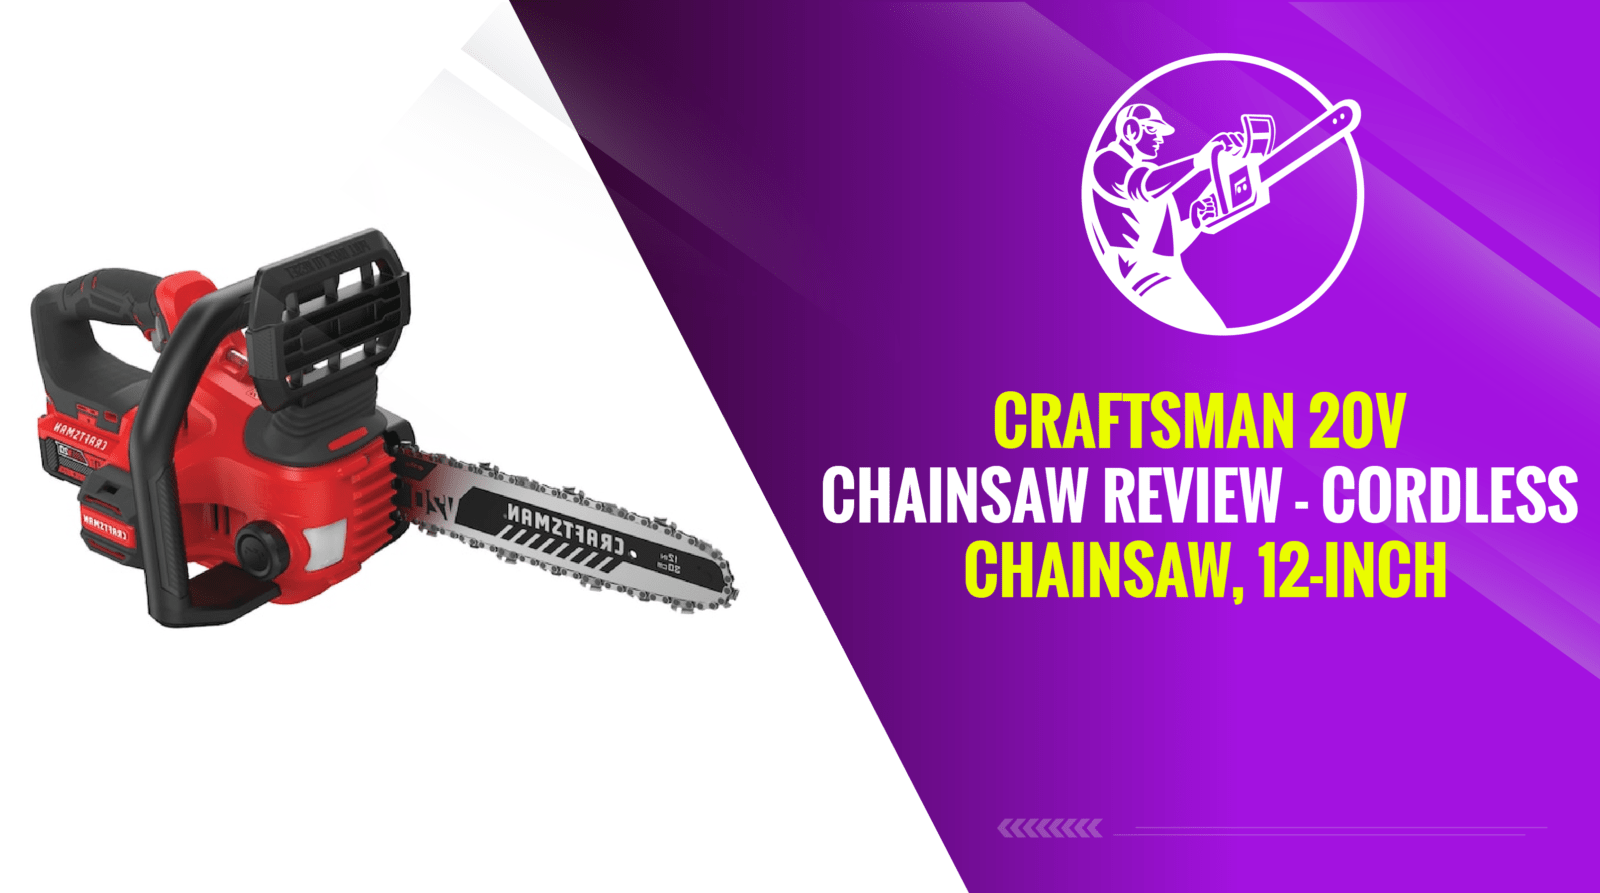 Craftsman 20v Chainsaw Review 2023 – Cordless Chainsaw, 12-Inch